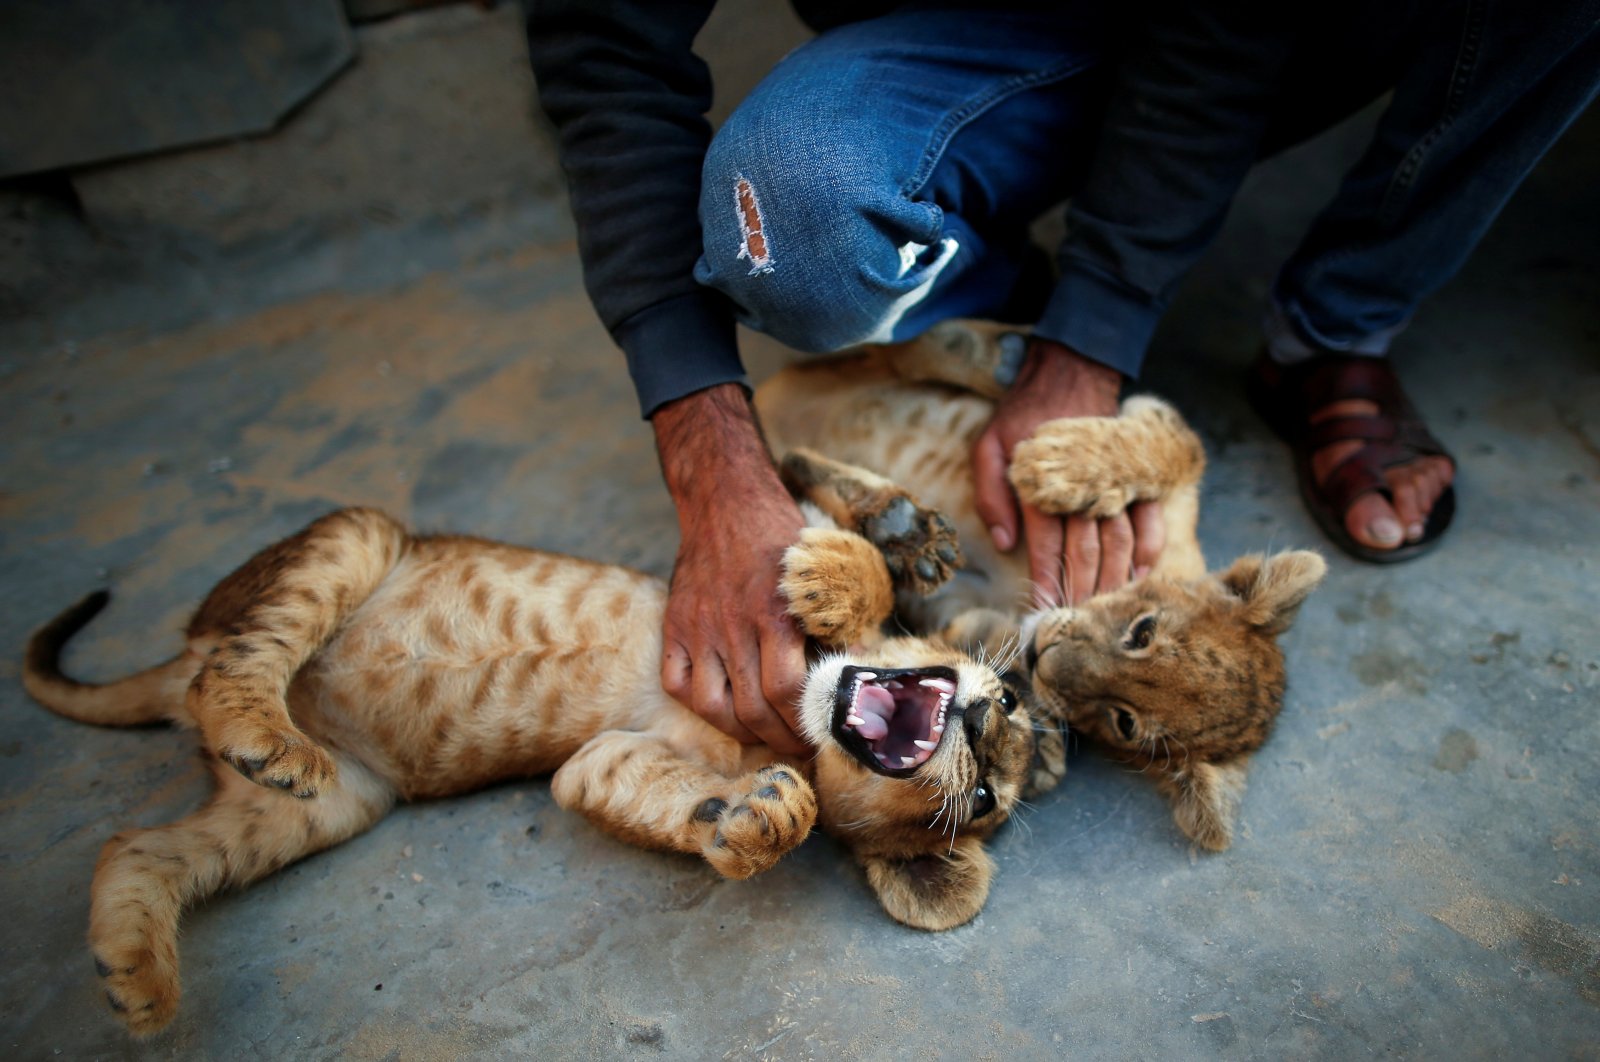 Palestinian man Naseem Abu Jamea plays with his pet lion cubs that he keeps on his house rooftop after buying them from a local zoo, in Khan Younis, in the southern Gaza Strip, Nov. 10, 2020. (Reuters Photo)